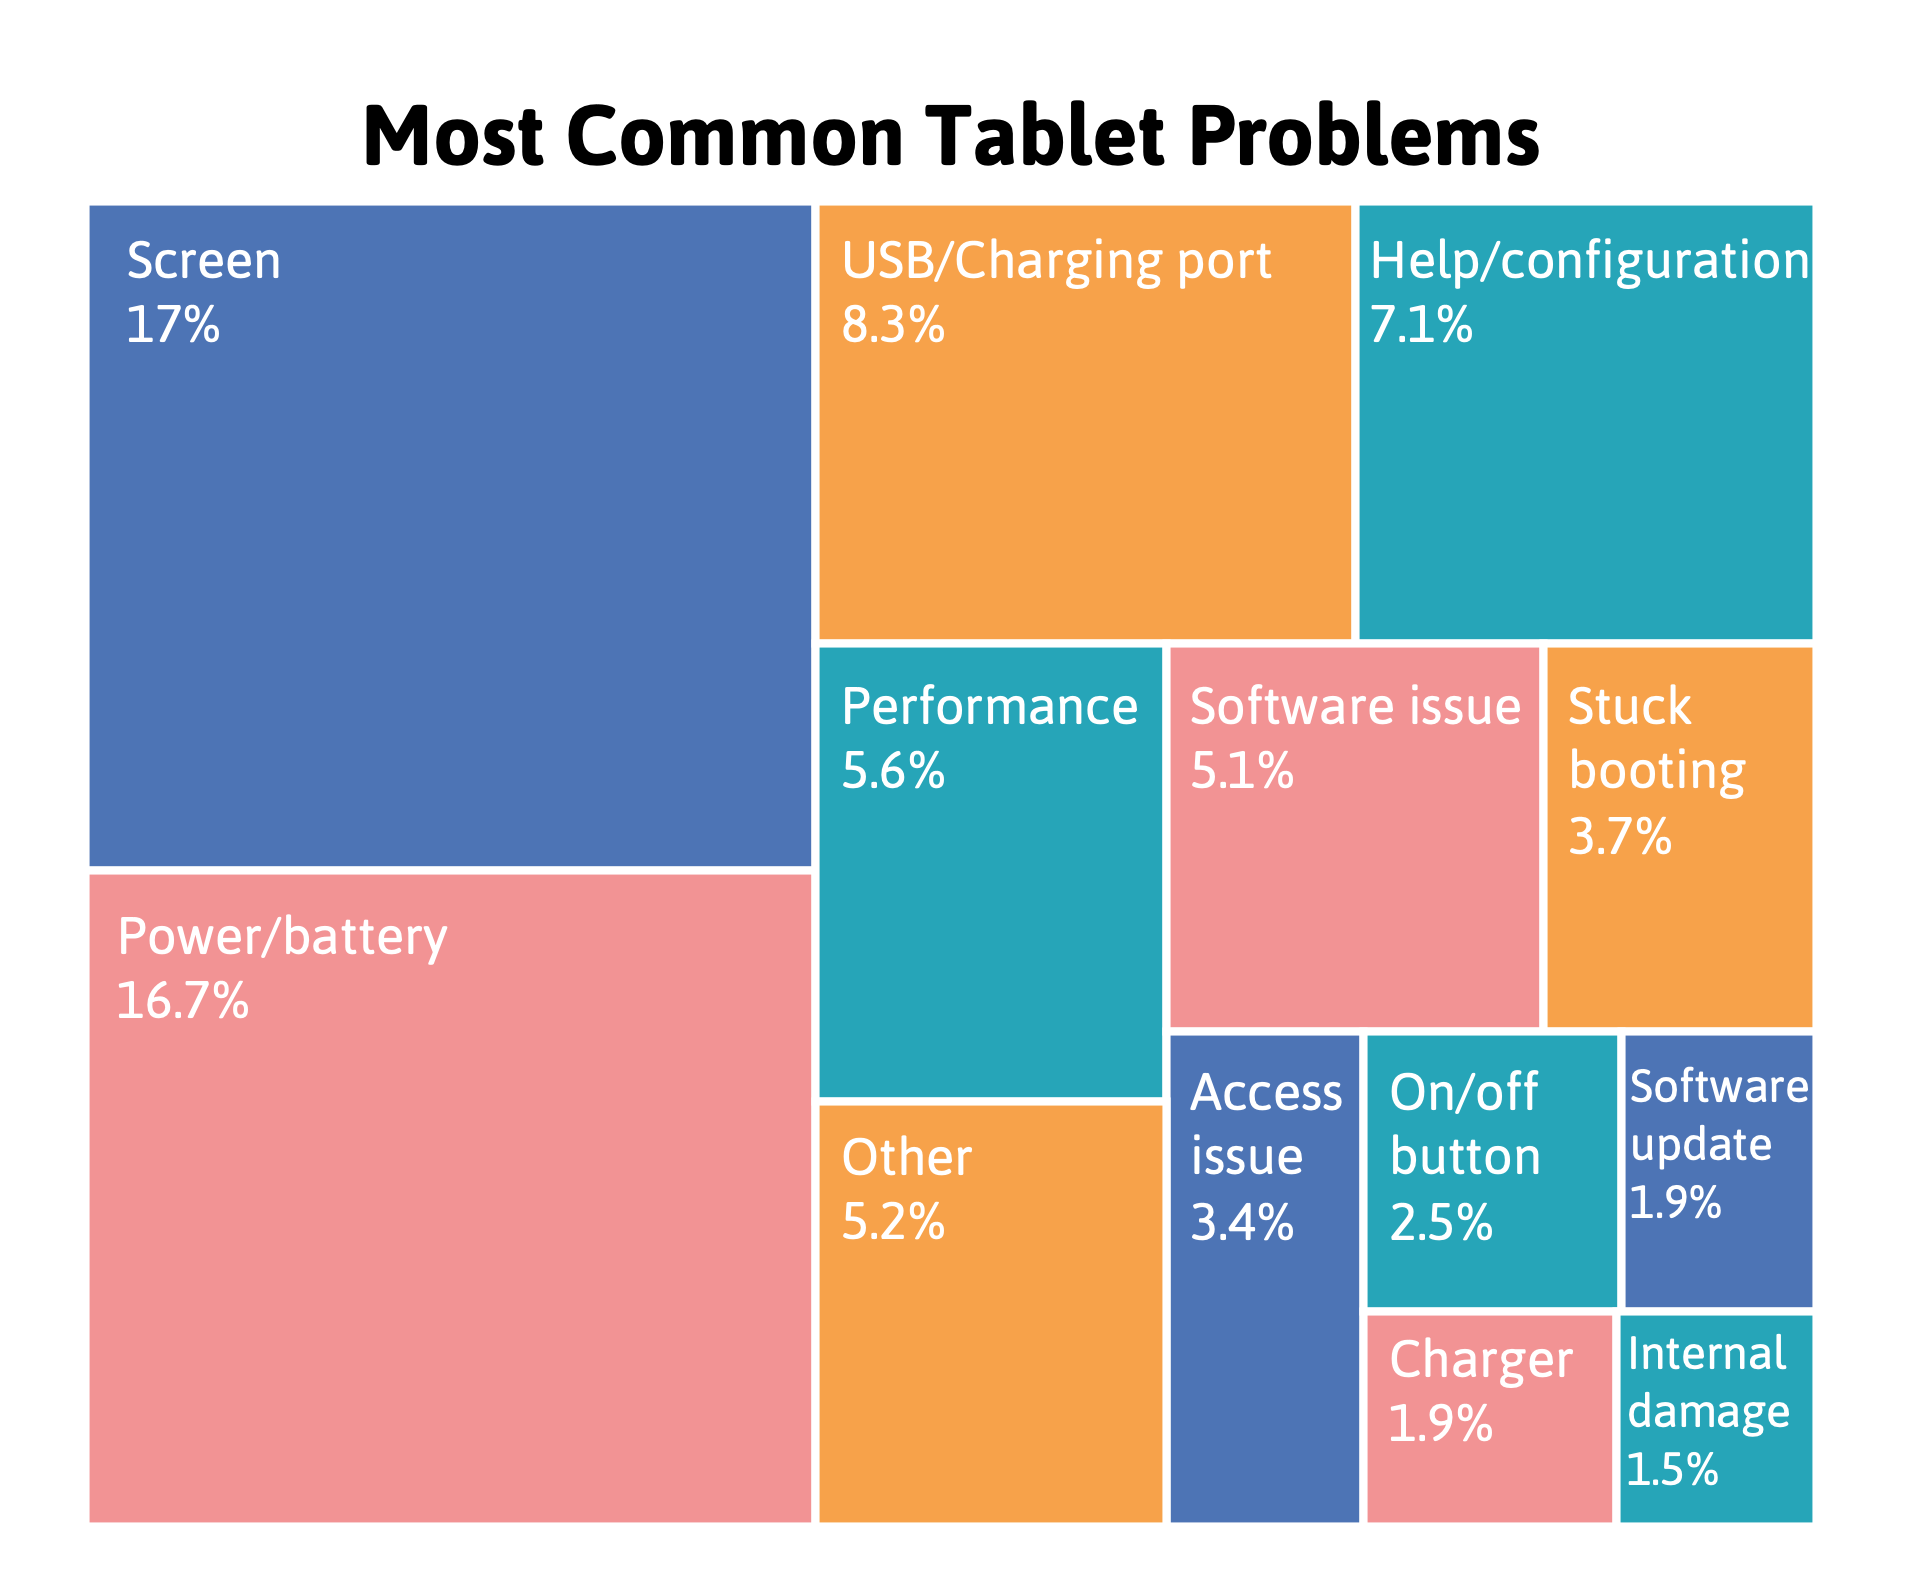 A diagram showing the most common tablet problems